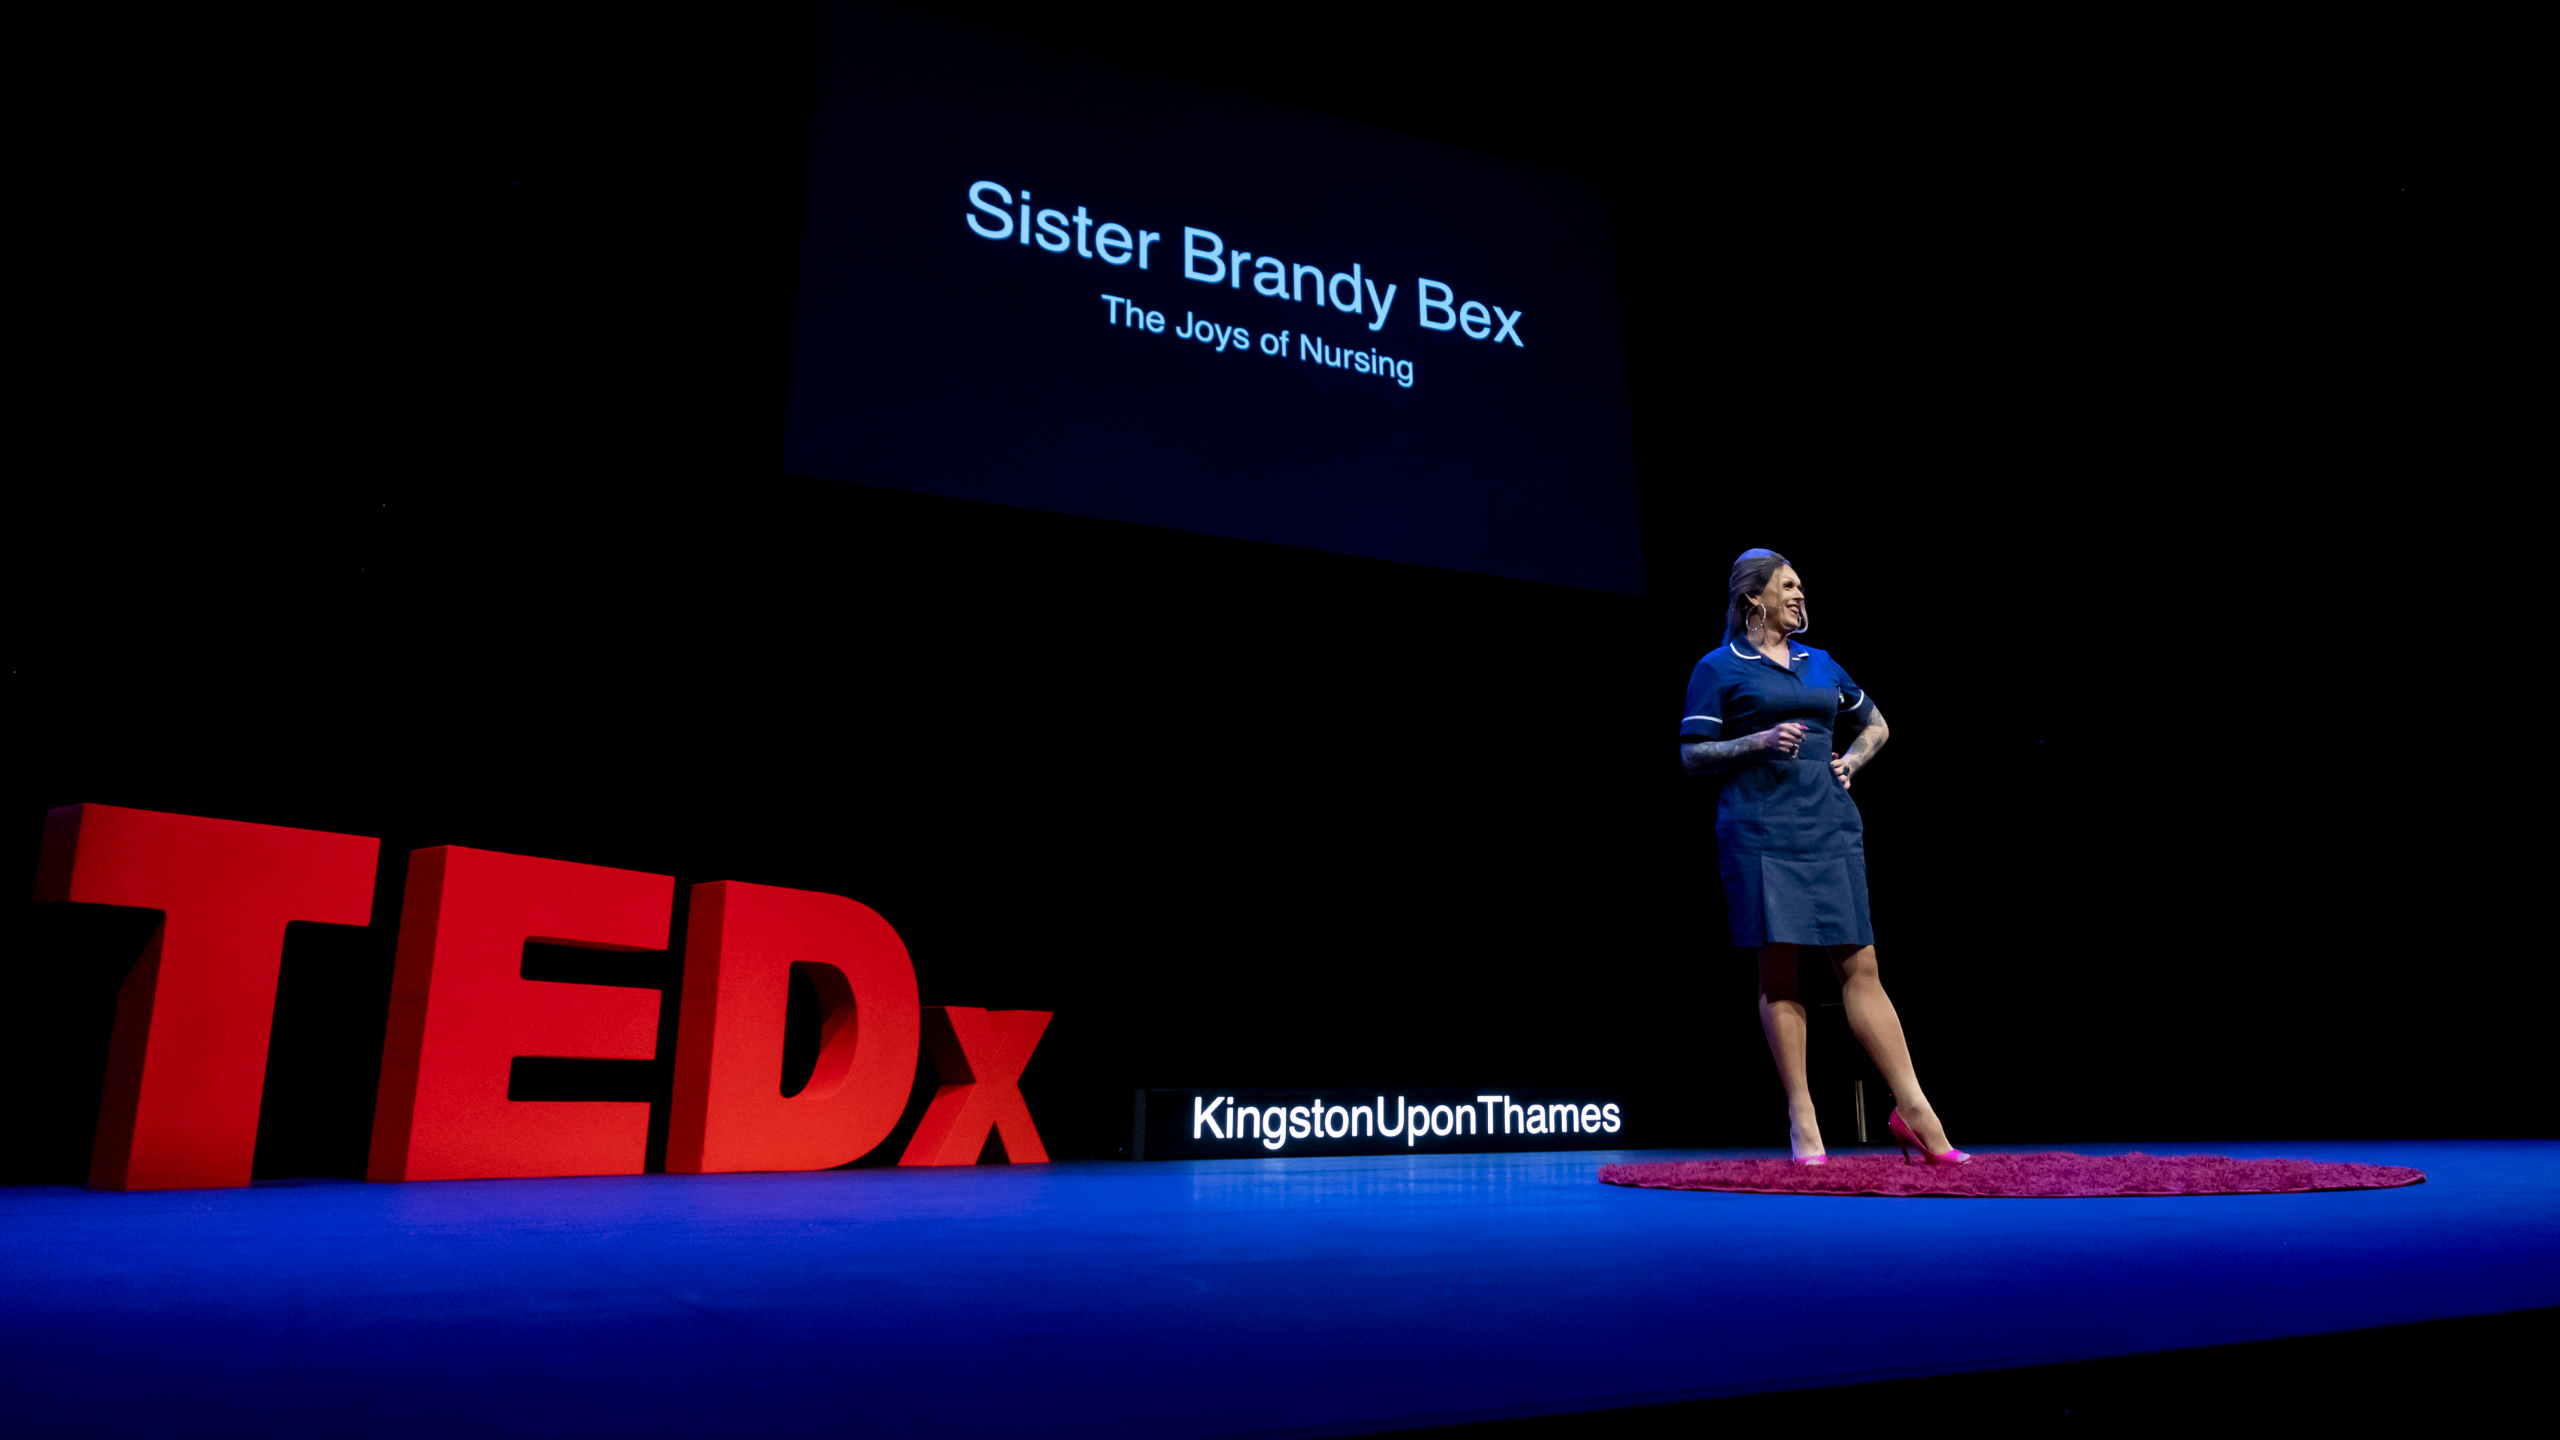 Load video: Sister Brandy Bex on stage at TEDx Kingston Upon Thames. Brandy is wearing her Band 6 navy nursing uniform and is standing on the iconic red circular rug. The large TEDx letter are visible in bright red at the rear of the stage.